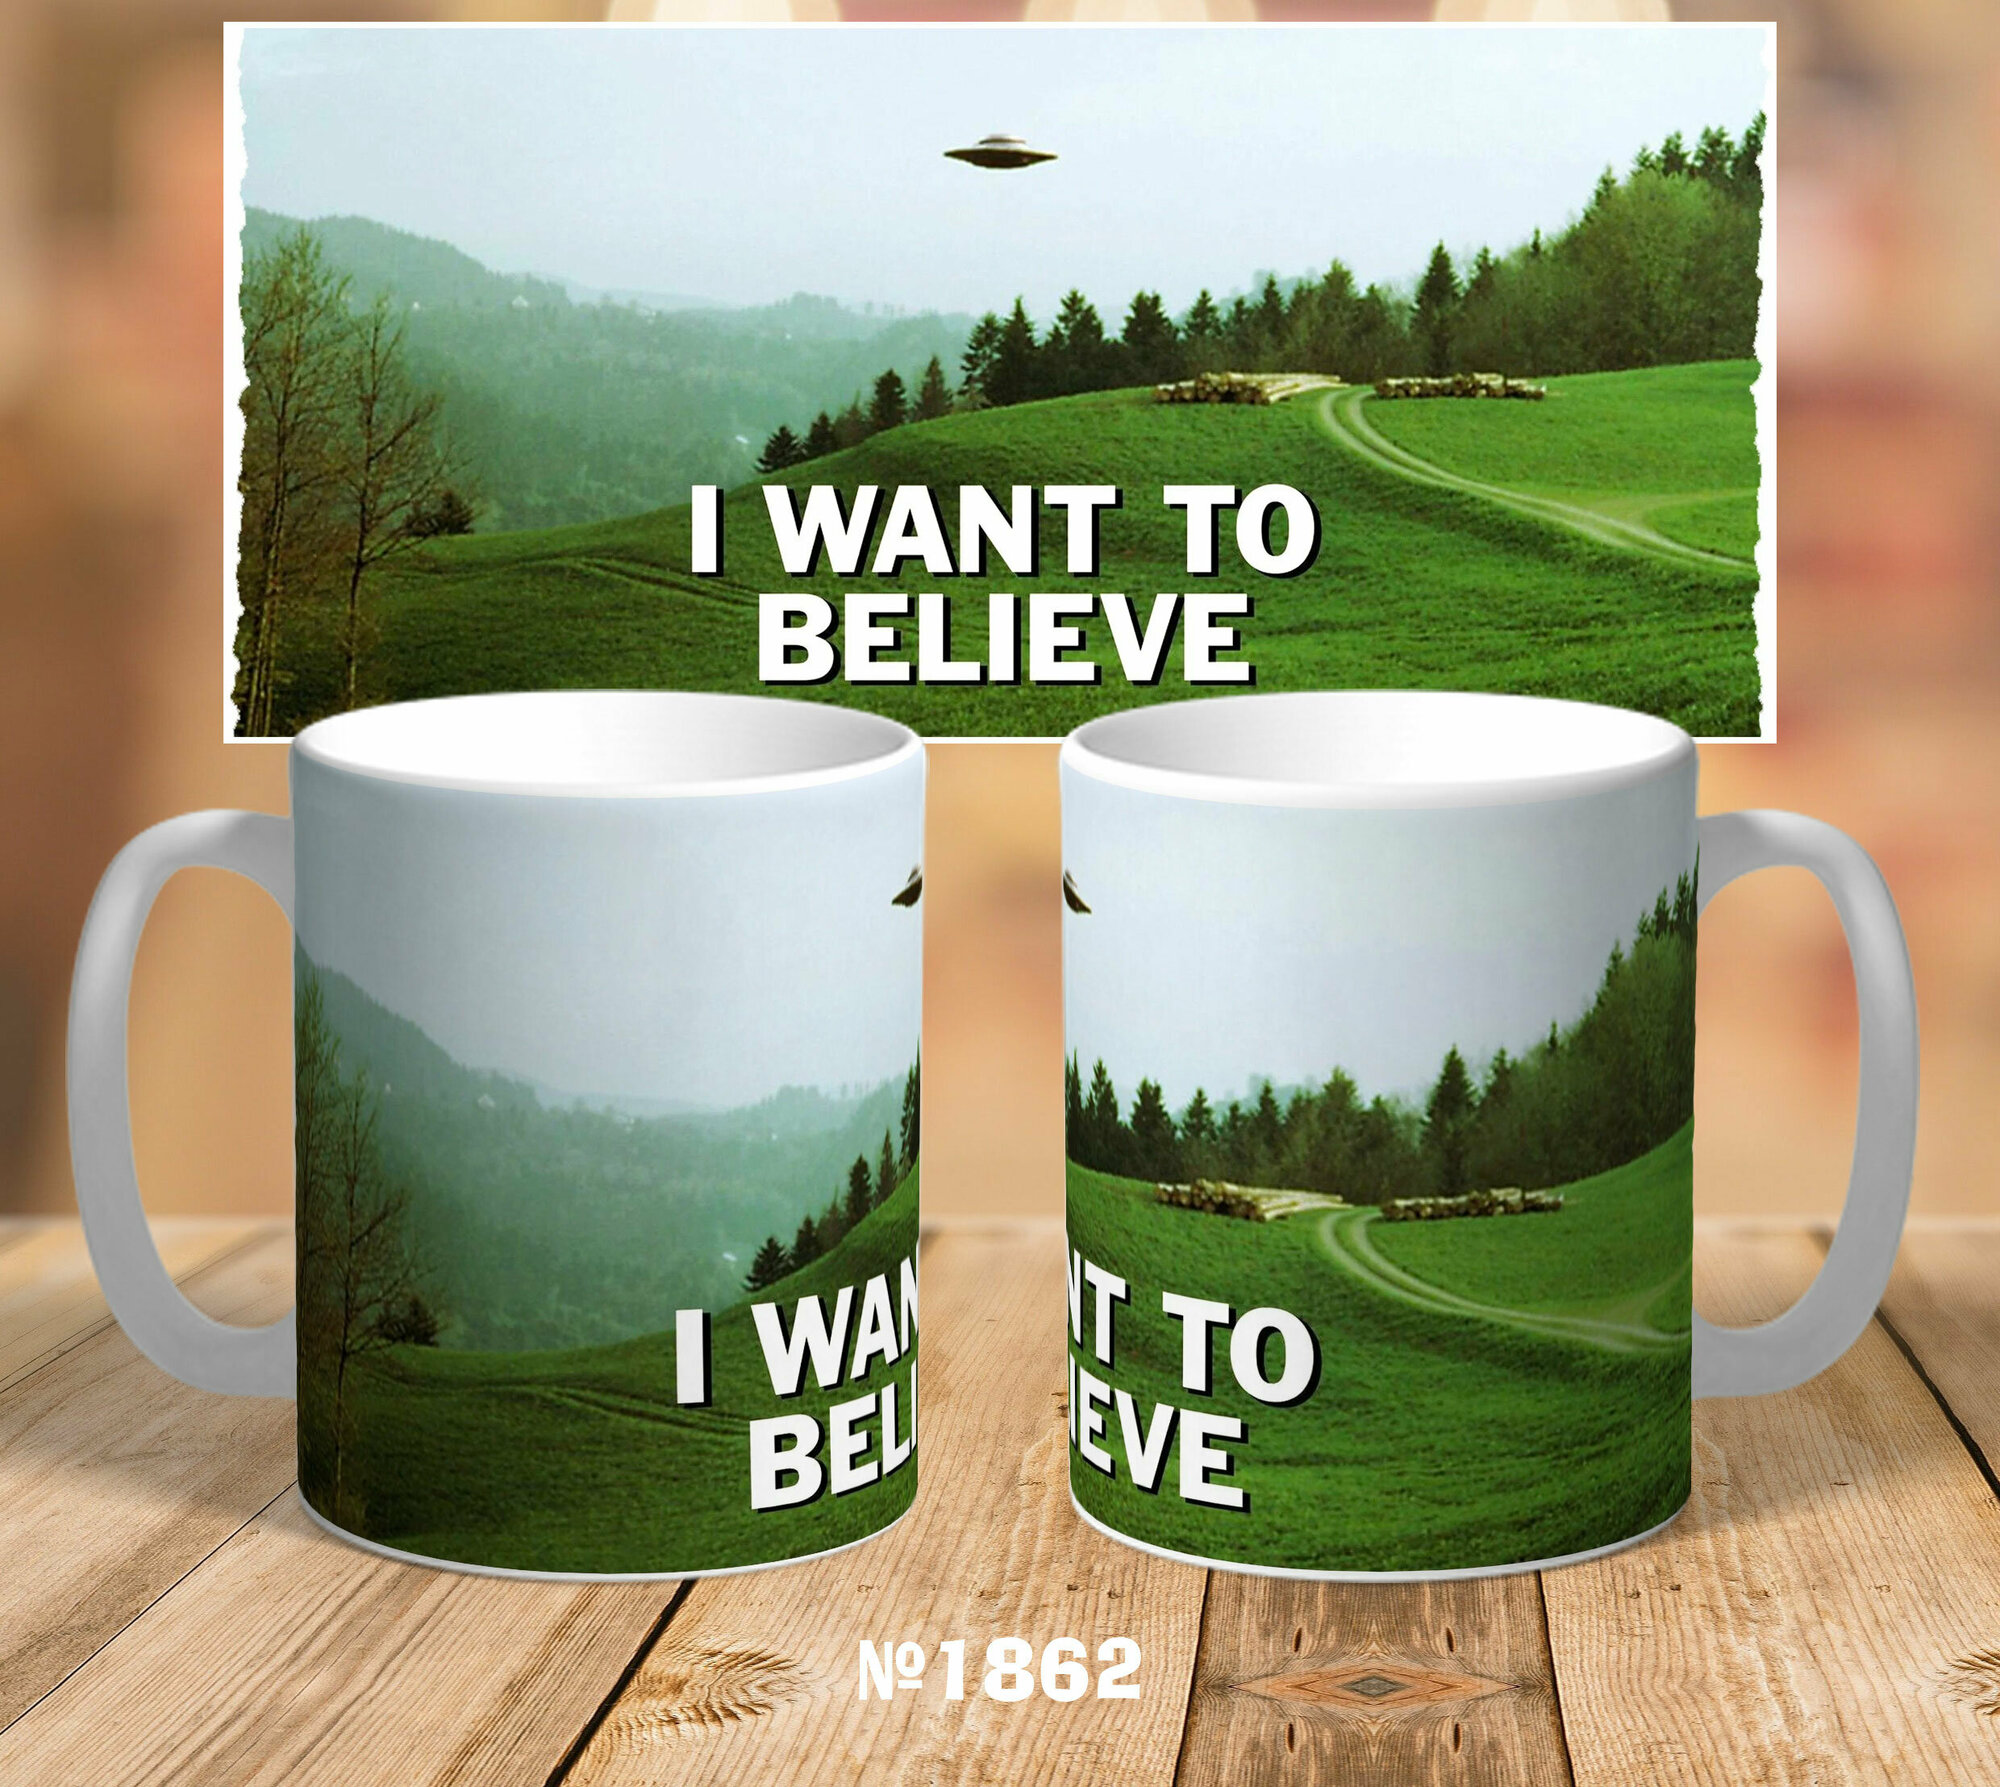 Кружка x files, i want to believe, Малдер, Скалли